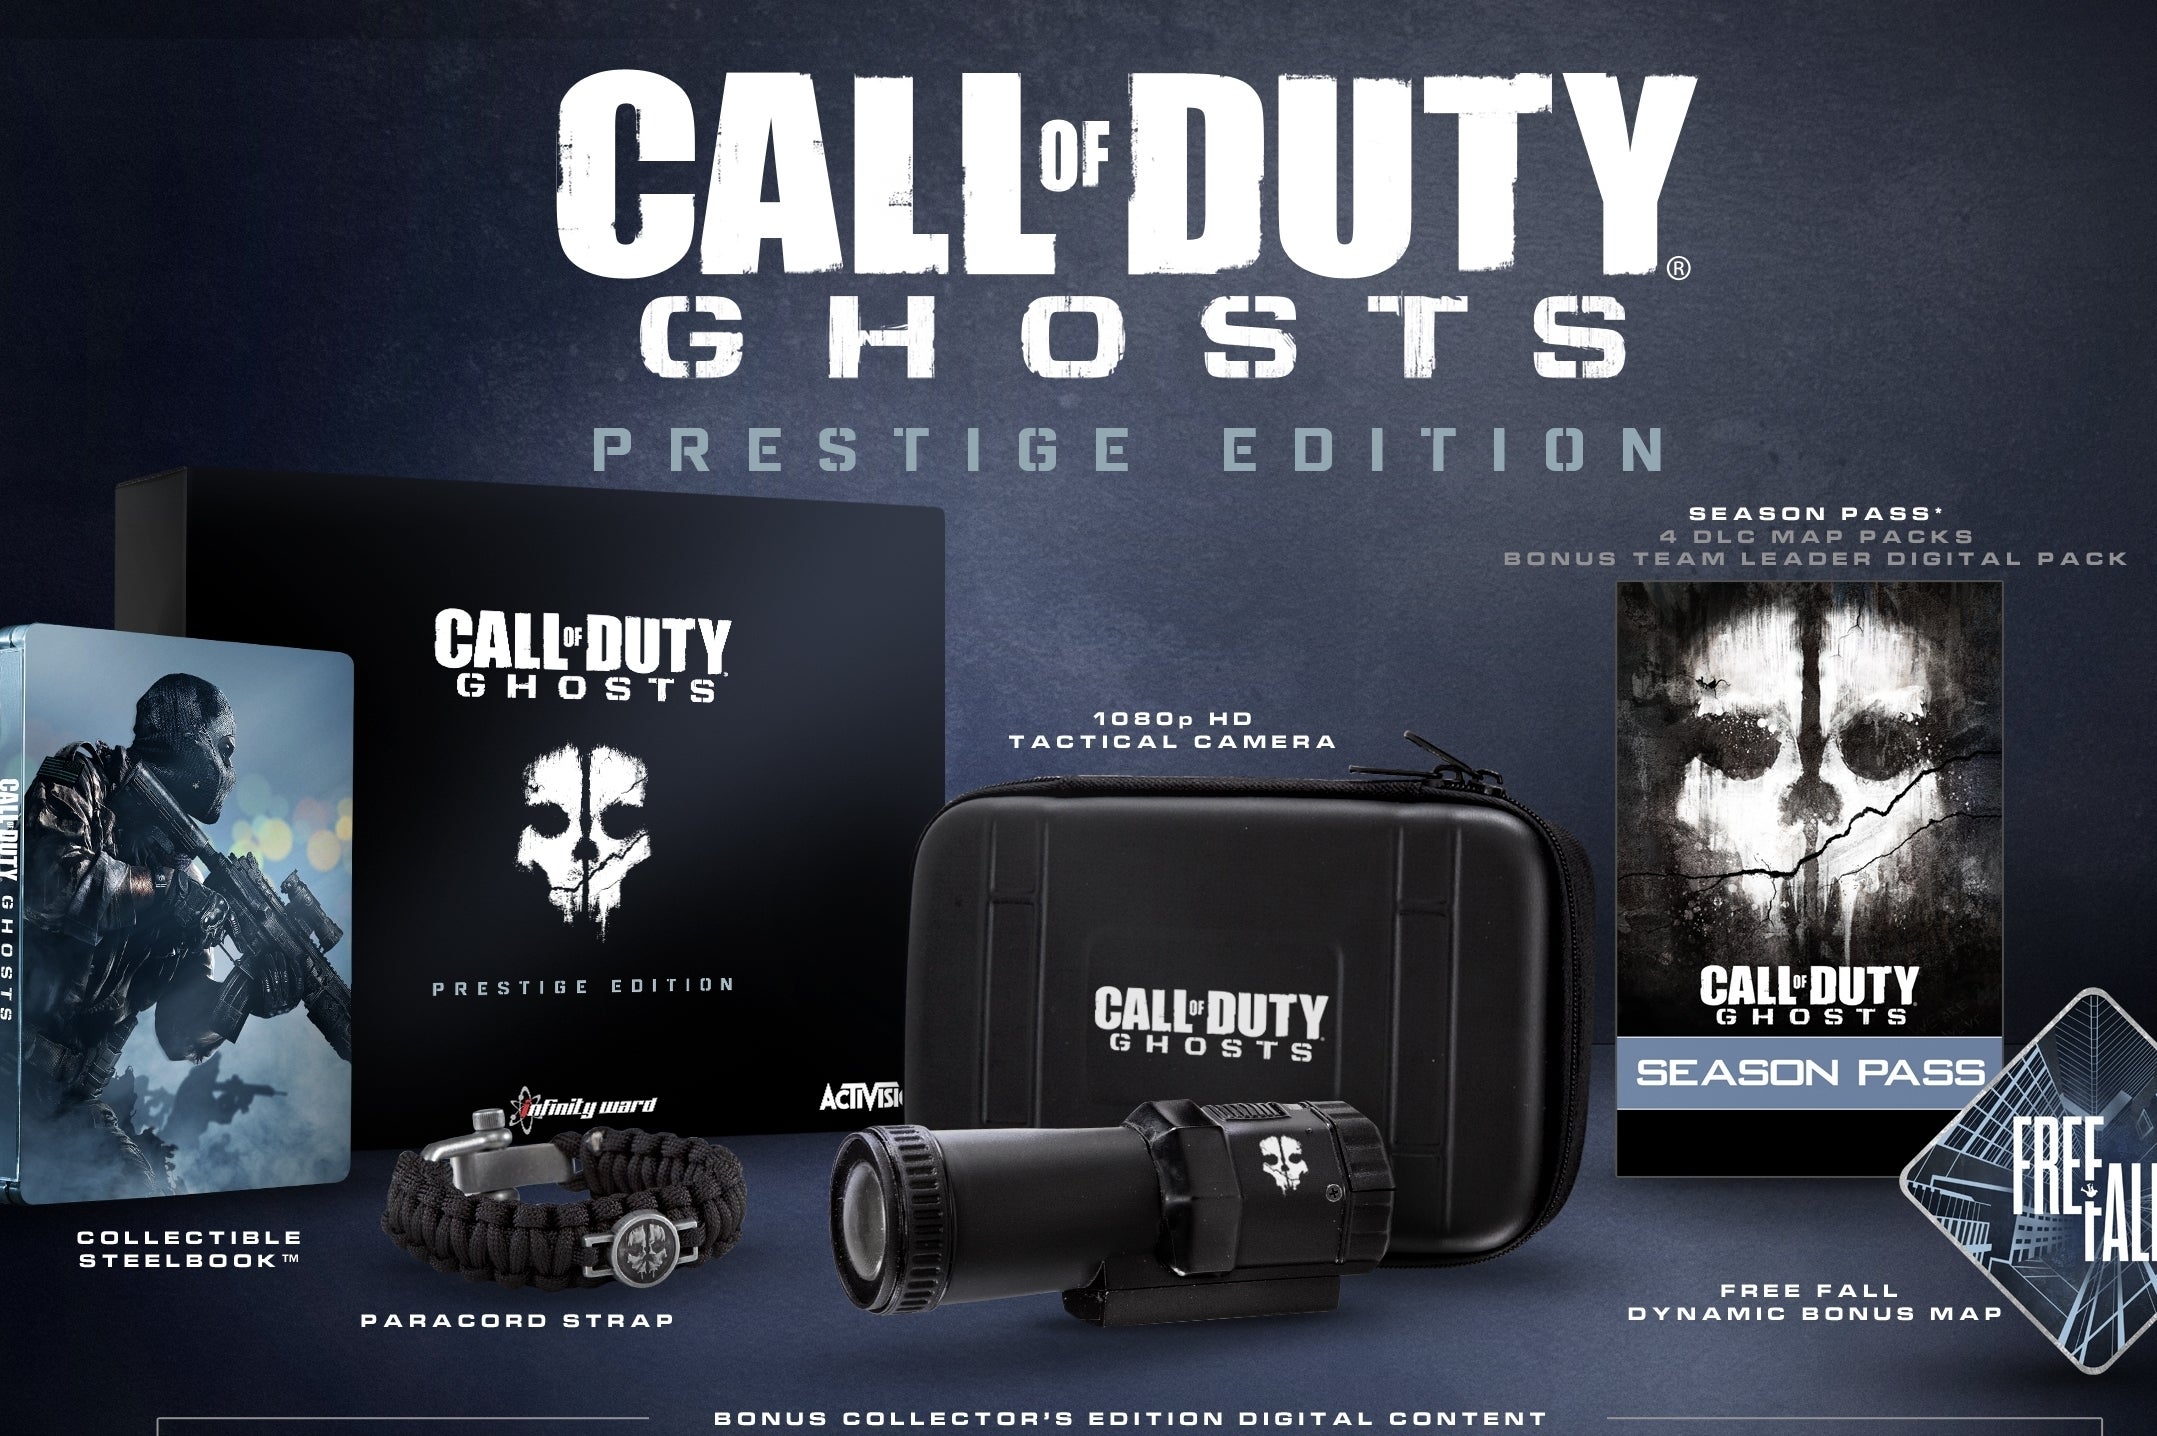 Call of Duty: Ghosts Prestige Edition includes a wearable camera